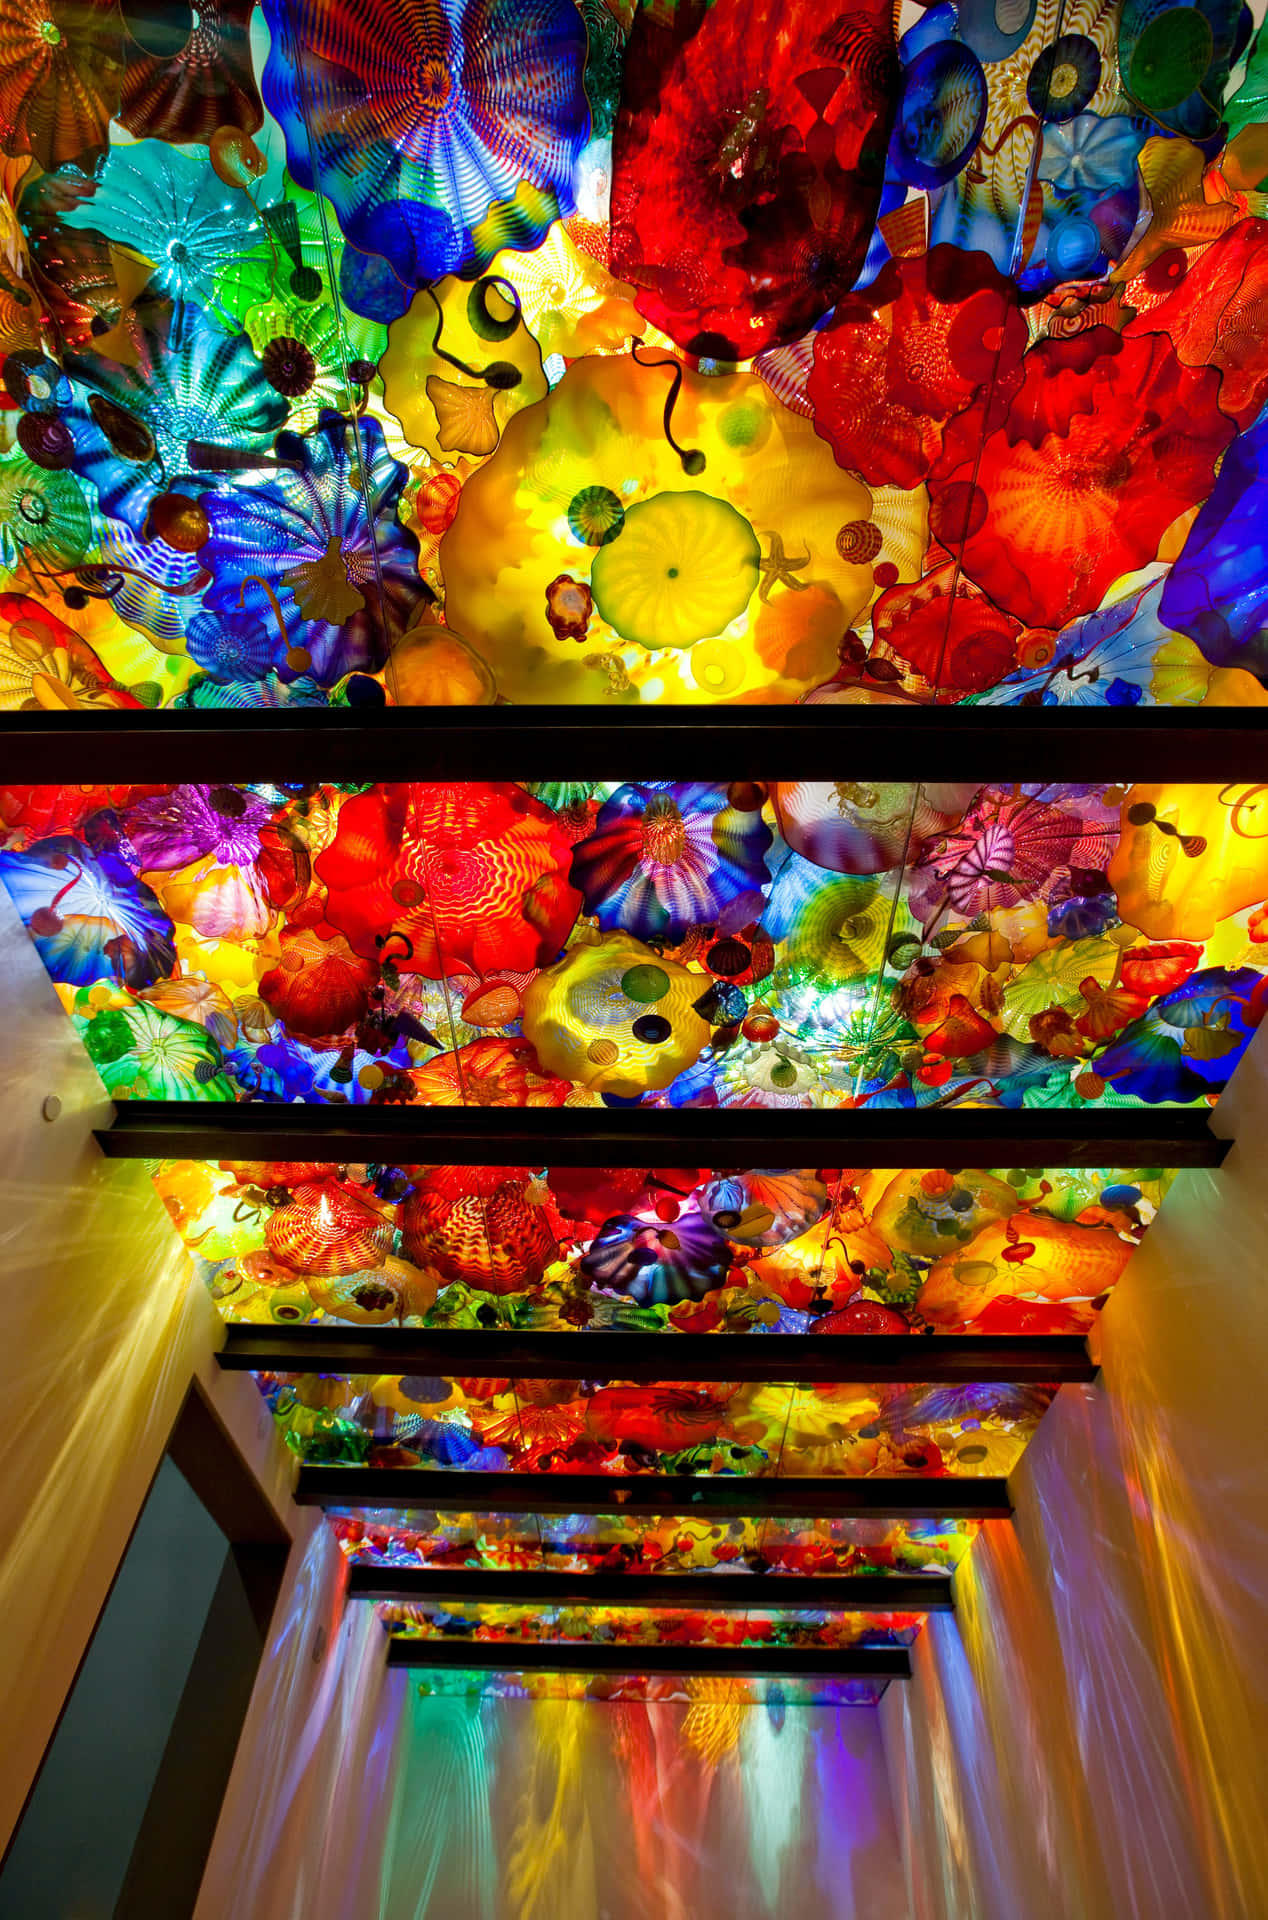 Chihuly Glass Ceiling Art Wallpaper